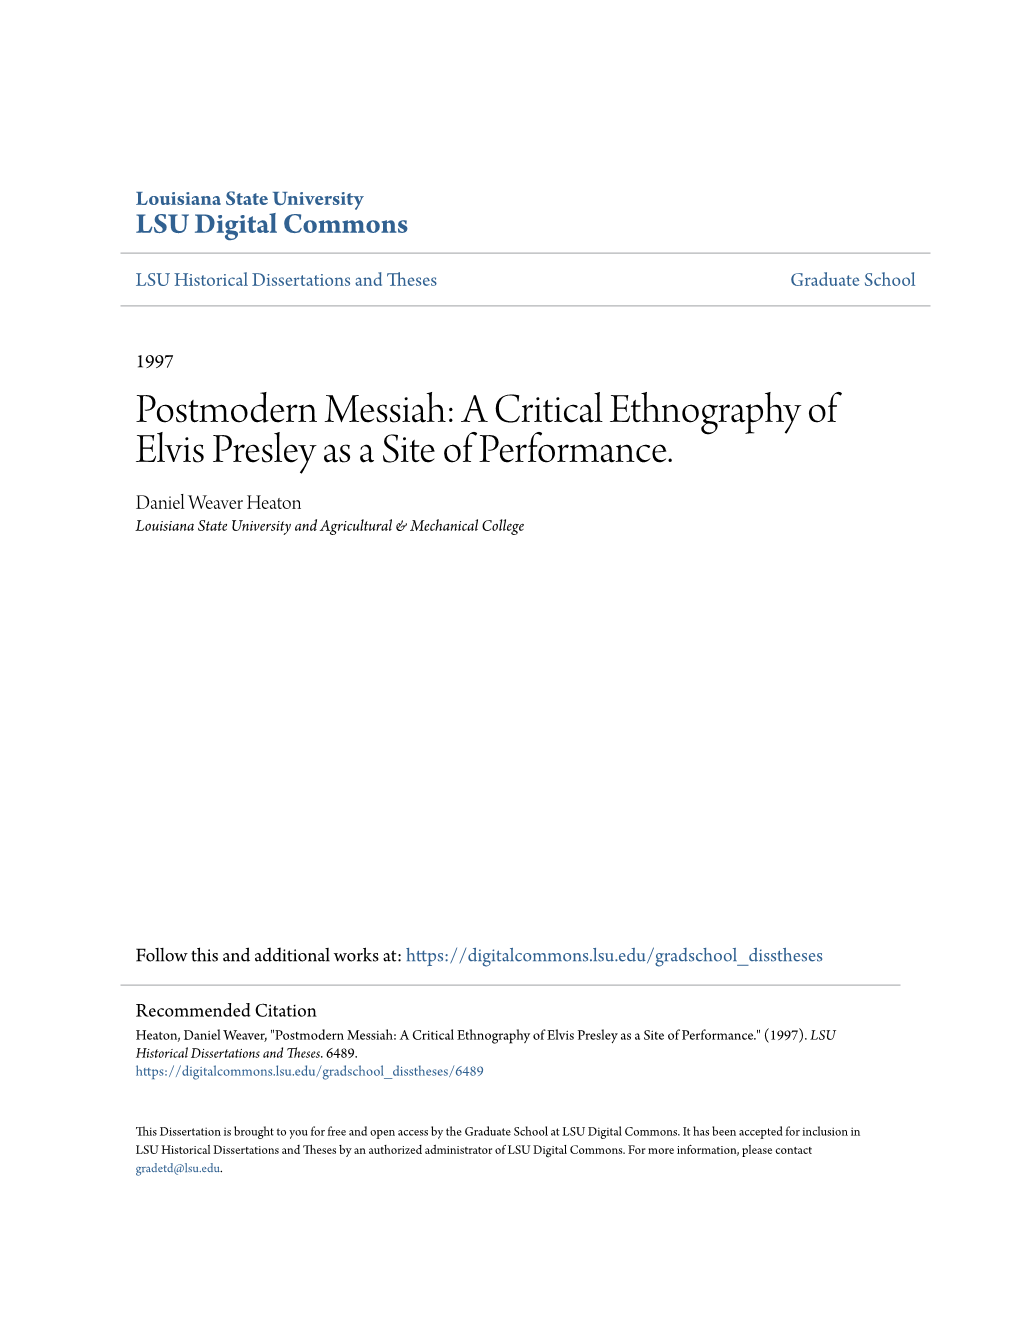 Postmodern Messiah: a Critical Ethnography of Elvis Presley As a Site of Performance